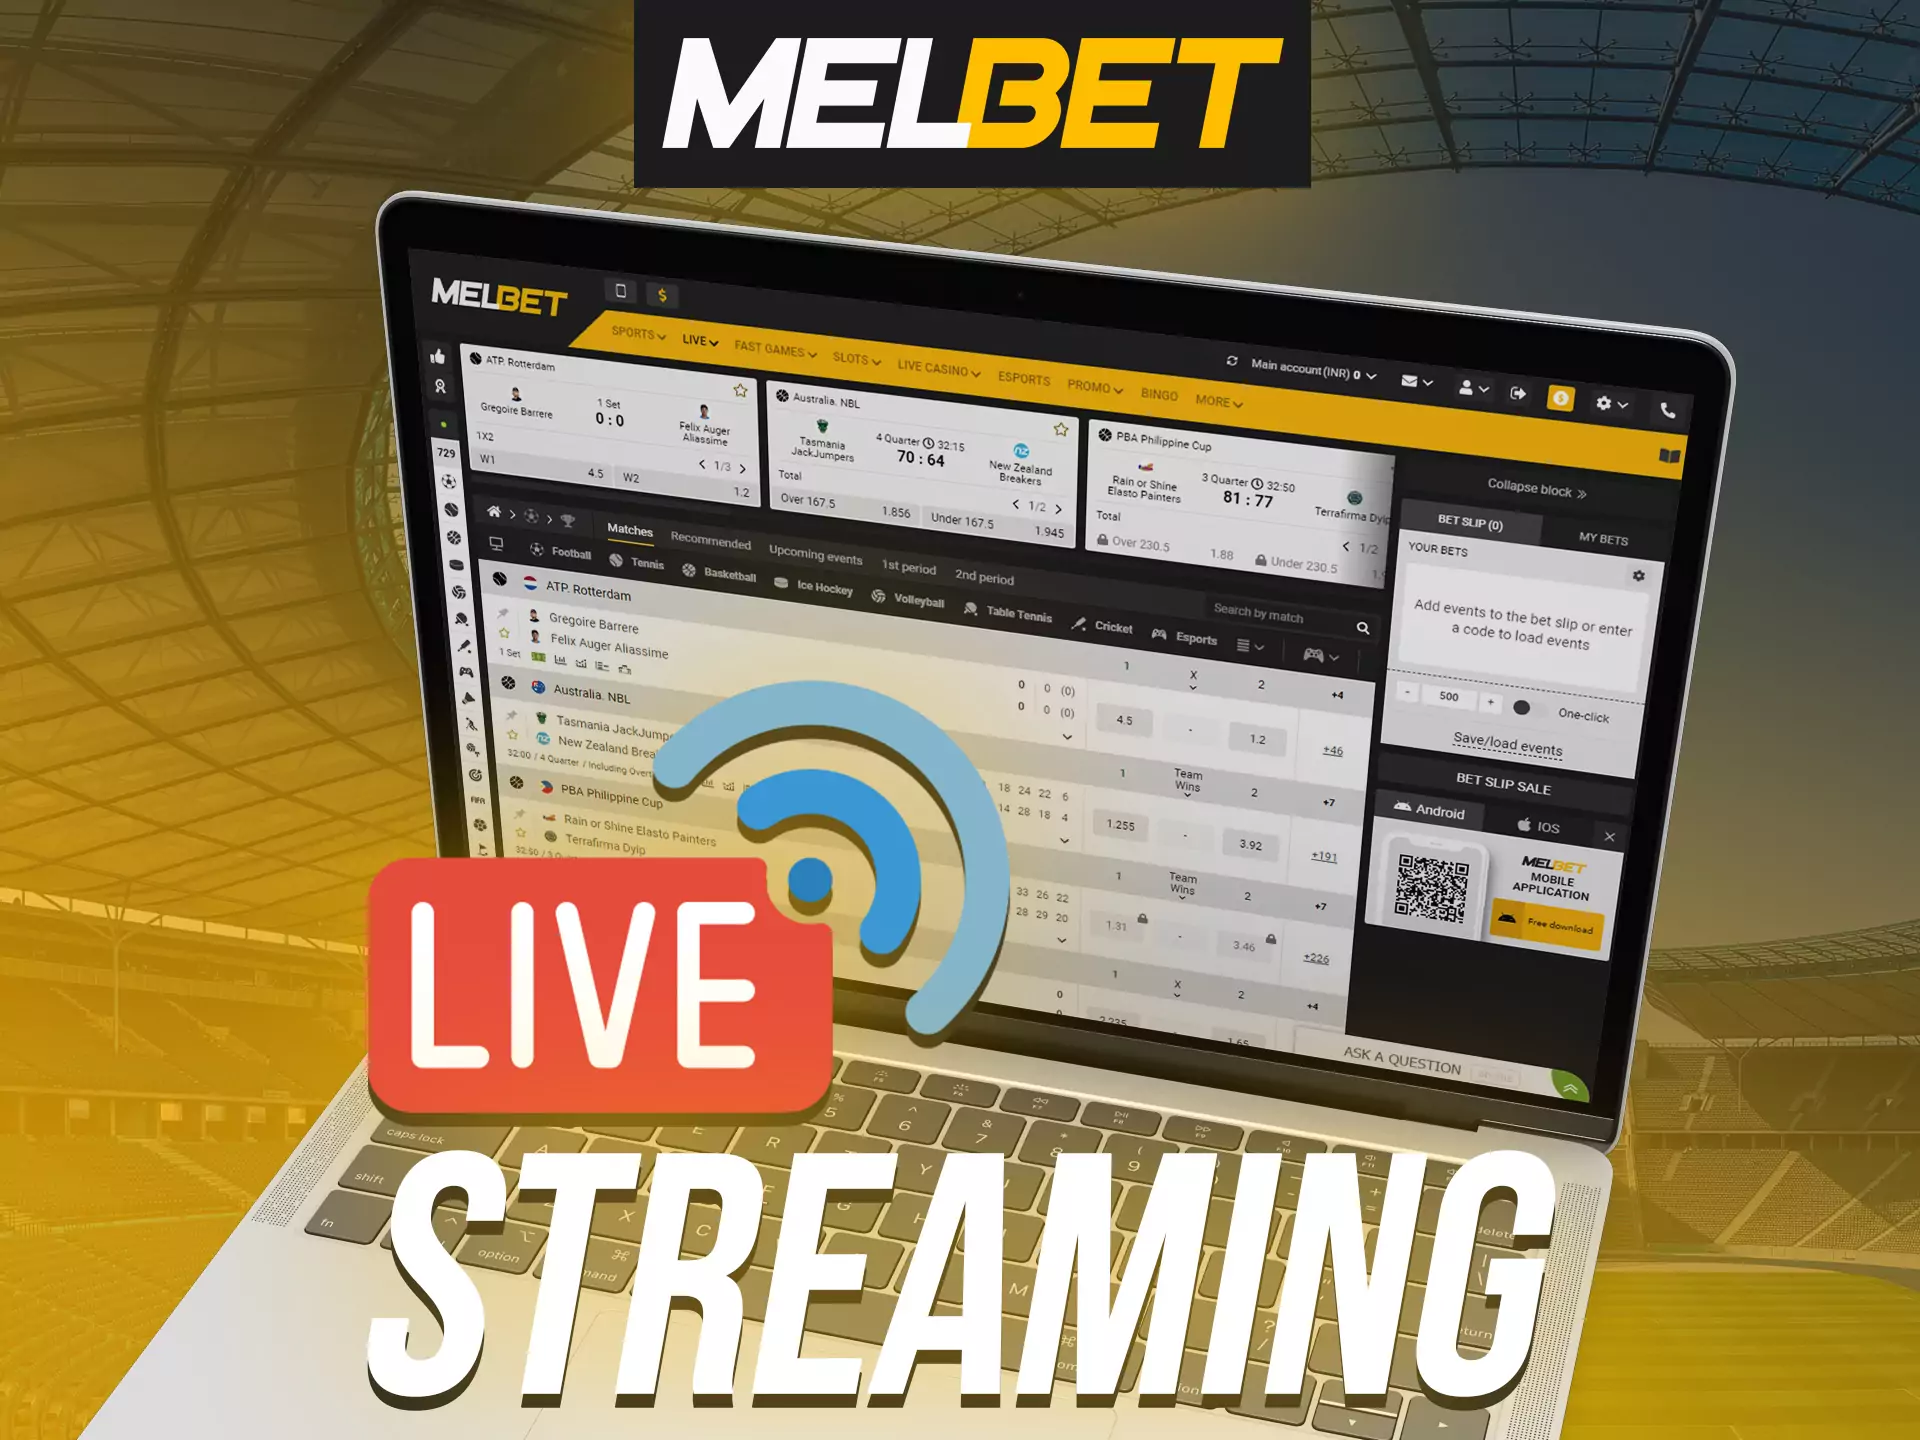 Watch and bet on matches in live format at Melbet.